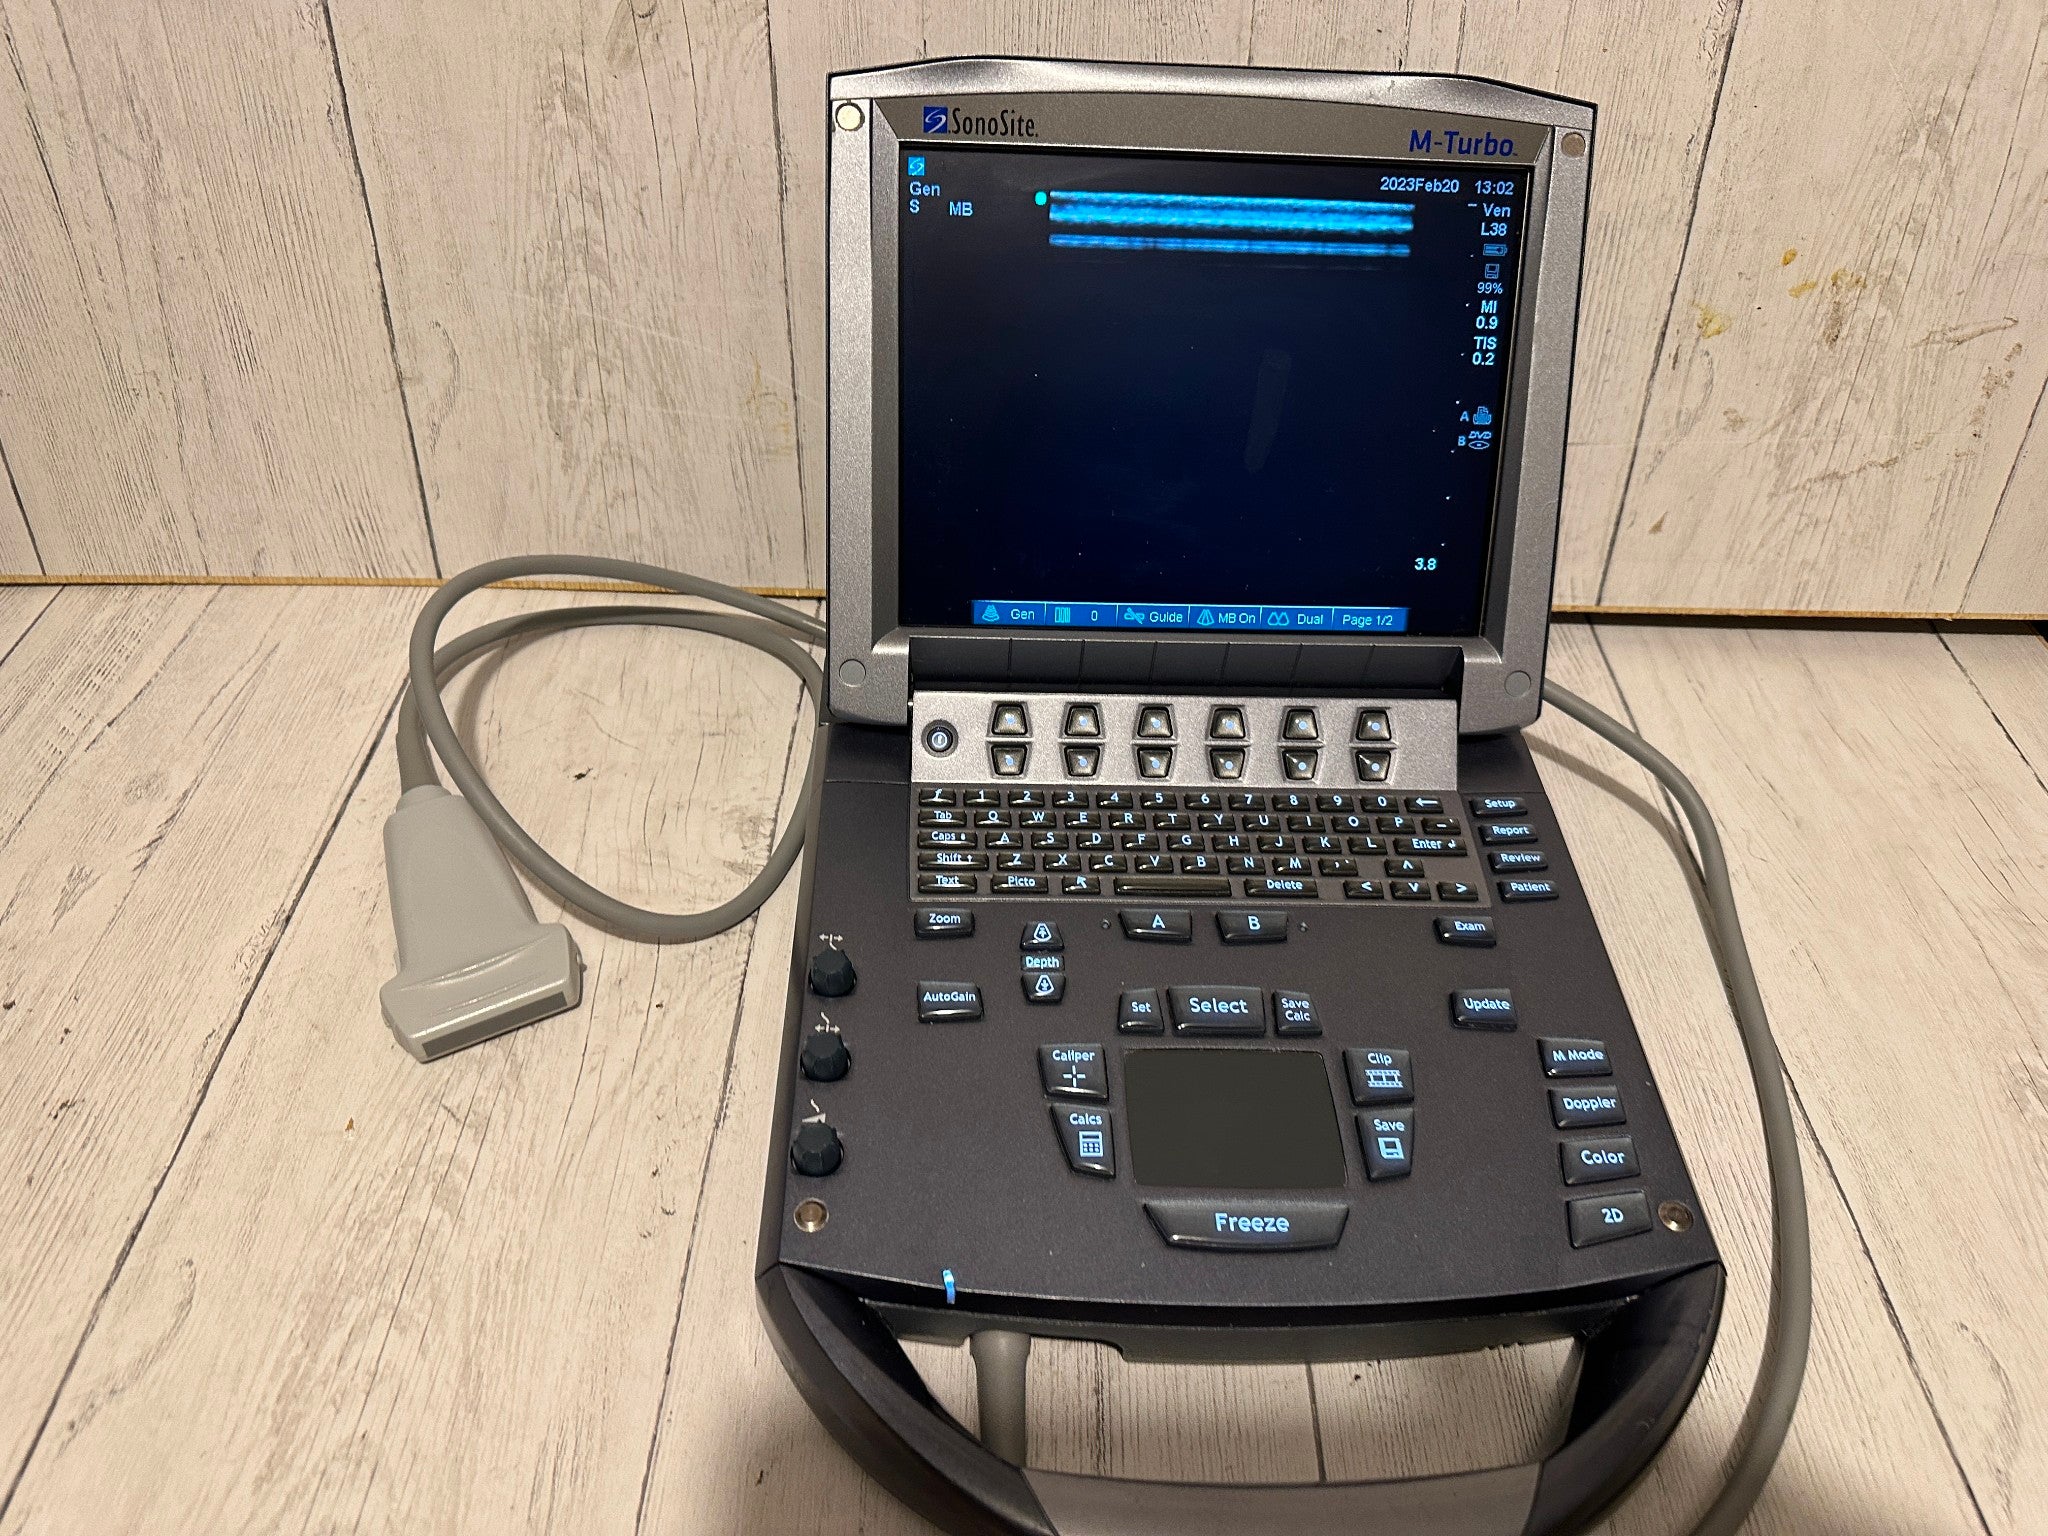 SonoSite M-Turbo Portable Ultrasound  2010 with Mini Dock Station DIAGNOSTIC ULTRASOUND MACHINES FOR SALE